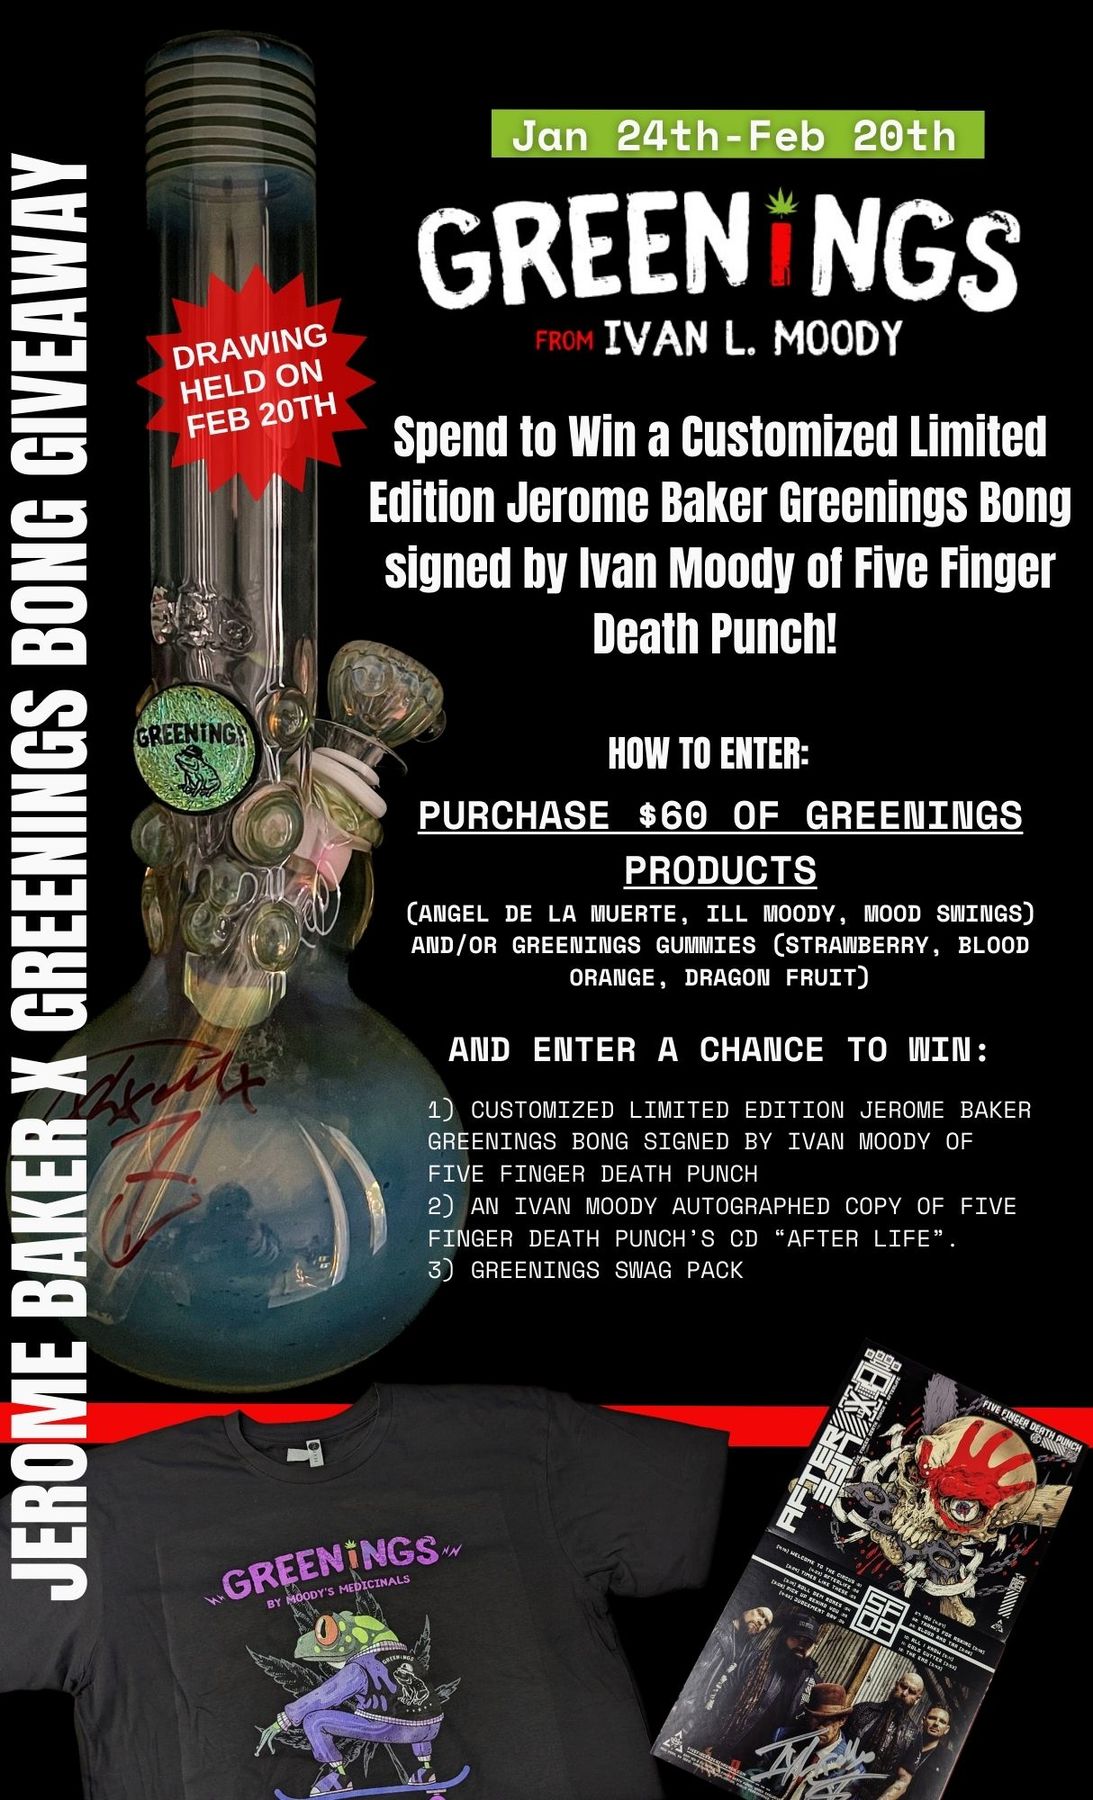 WIN A CUSTOM AUTOGRAPHED JEROME BAKER BONG BY IVAN MOODY OF FIVE FINGER DEATH PUNCHPost Image